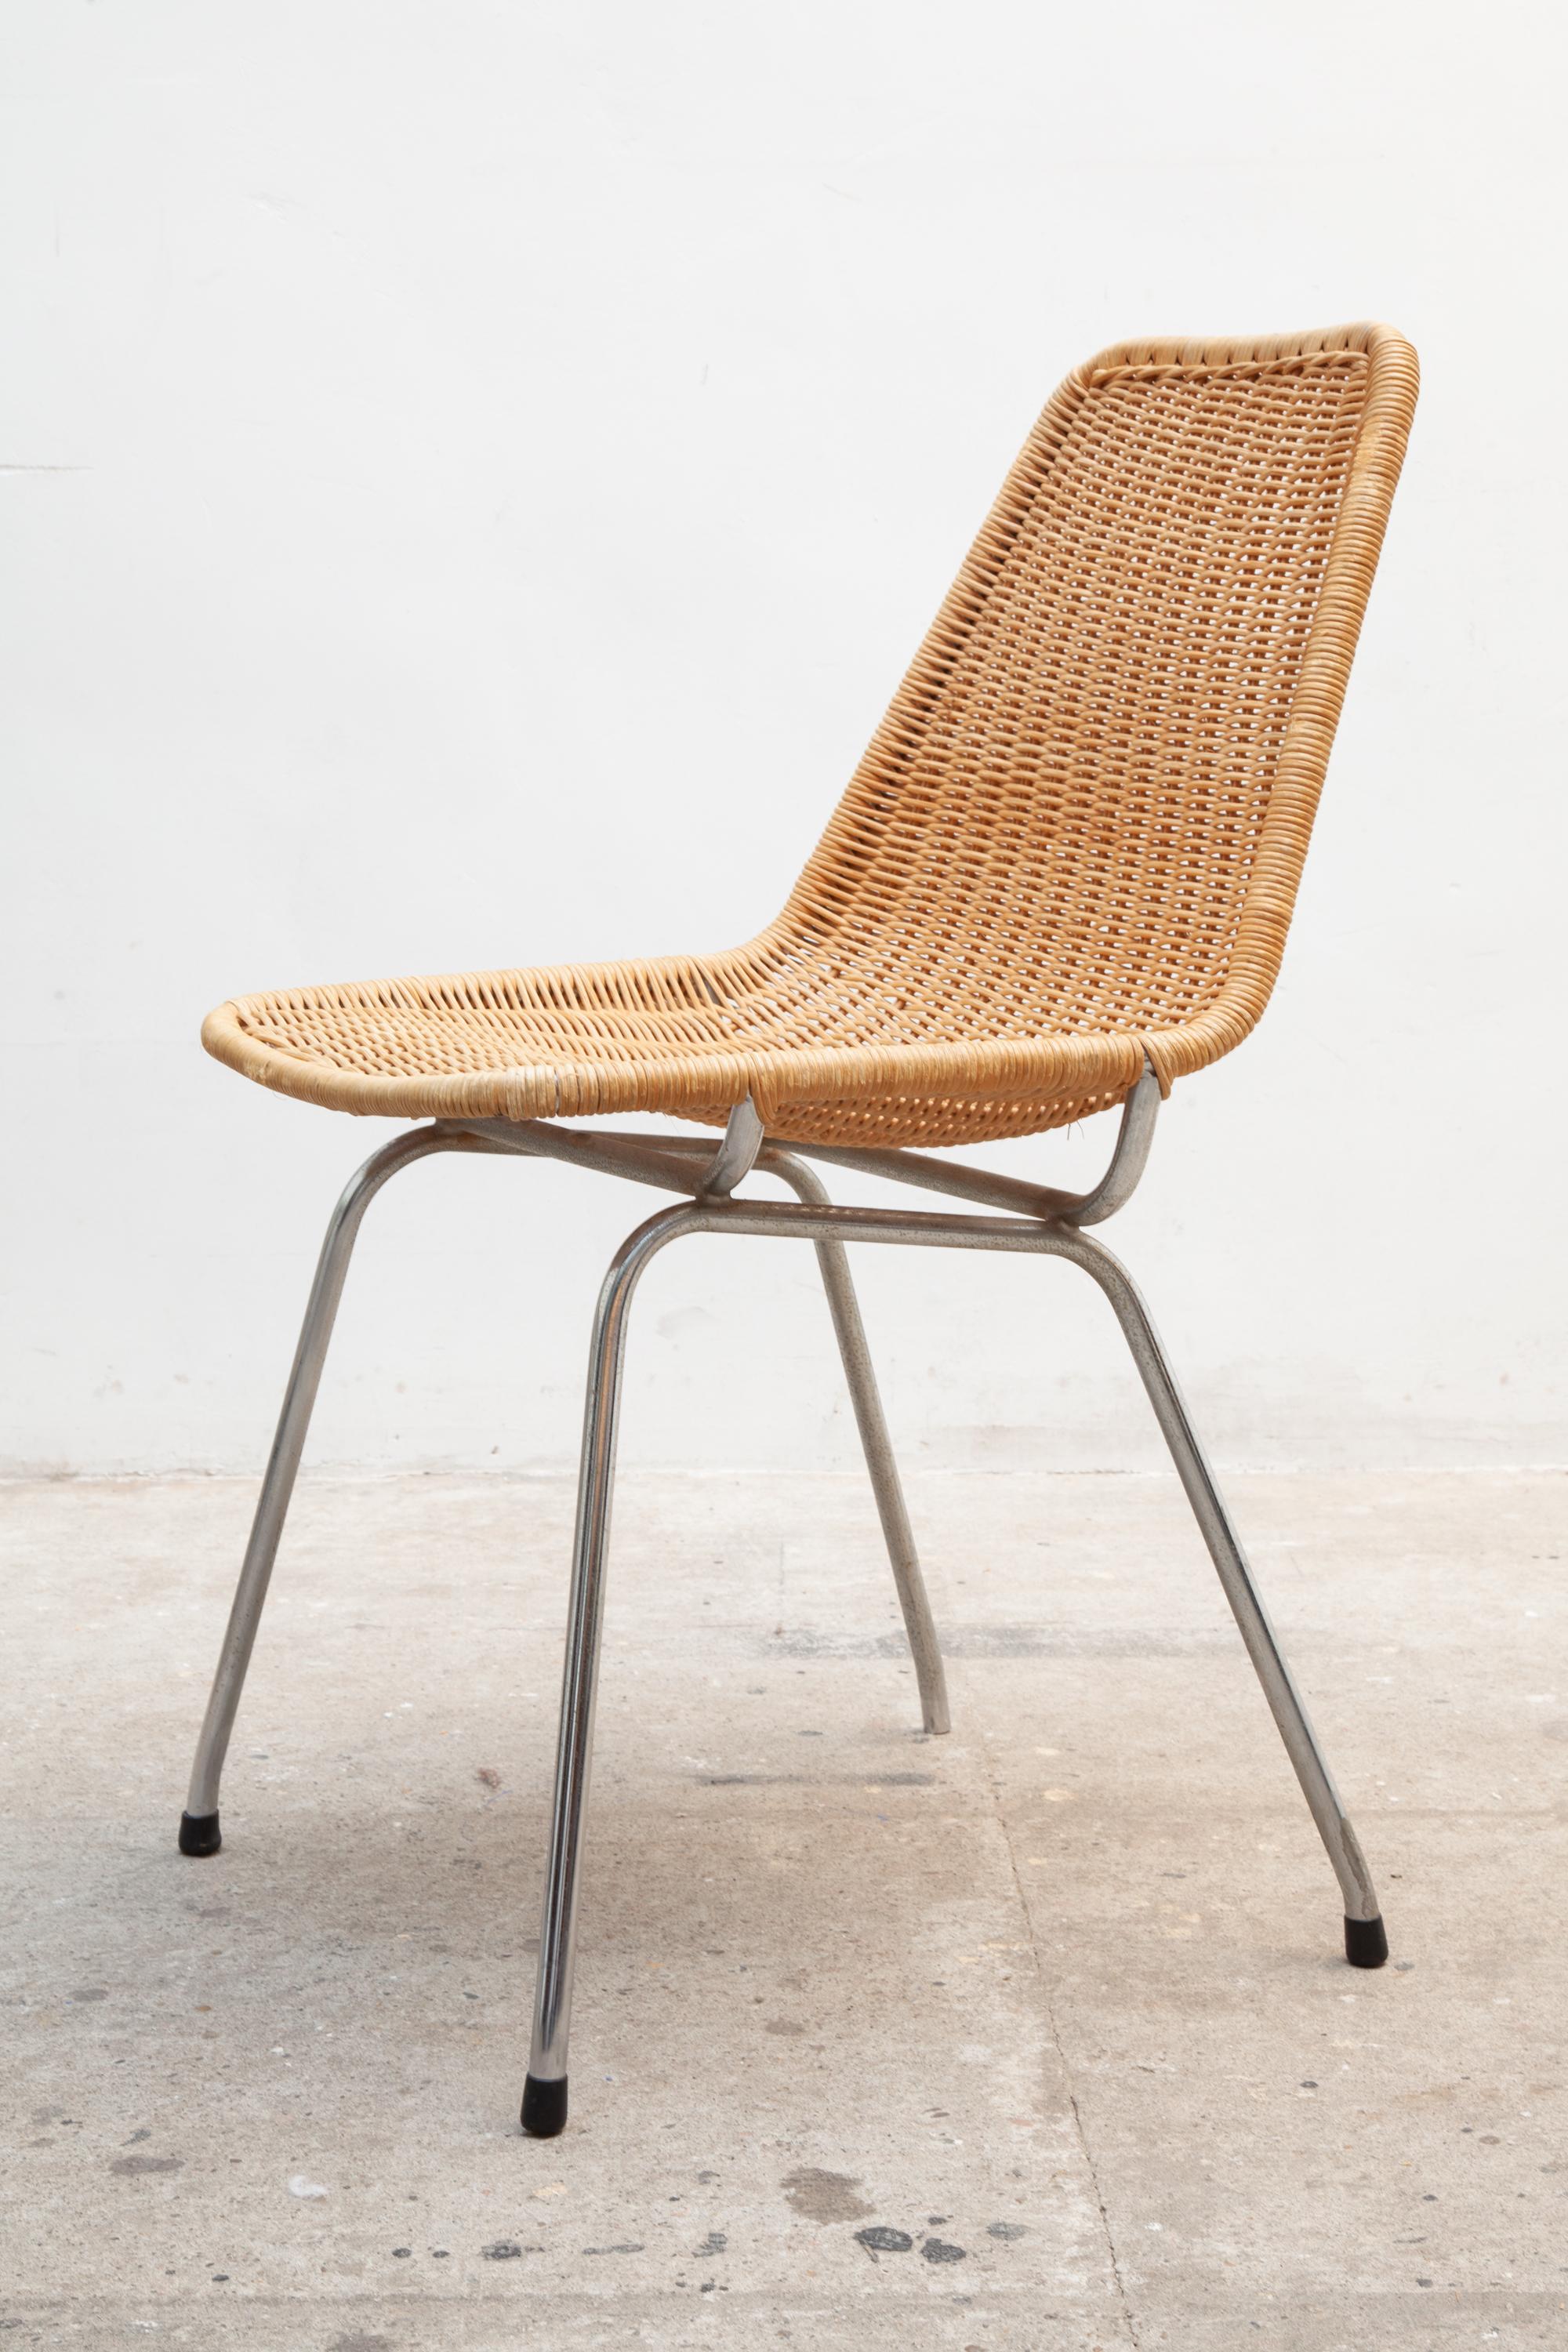 Beautiful set of four wicker chairs designed by Dirk van Sliedrecht for Rohe,Netherlands features a simple and timeless design due to its light-weight and family character, which makes it suitable for any domestic or public environment. The chairs